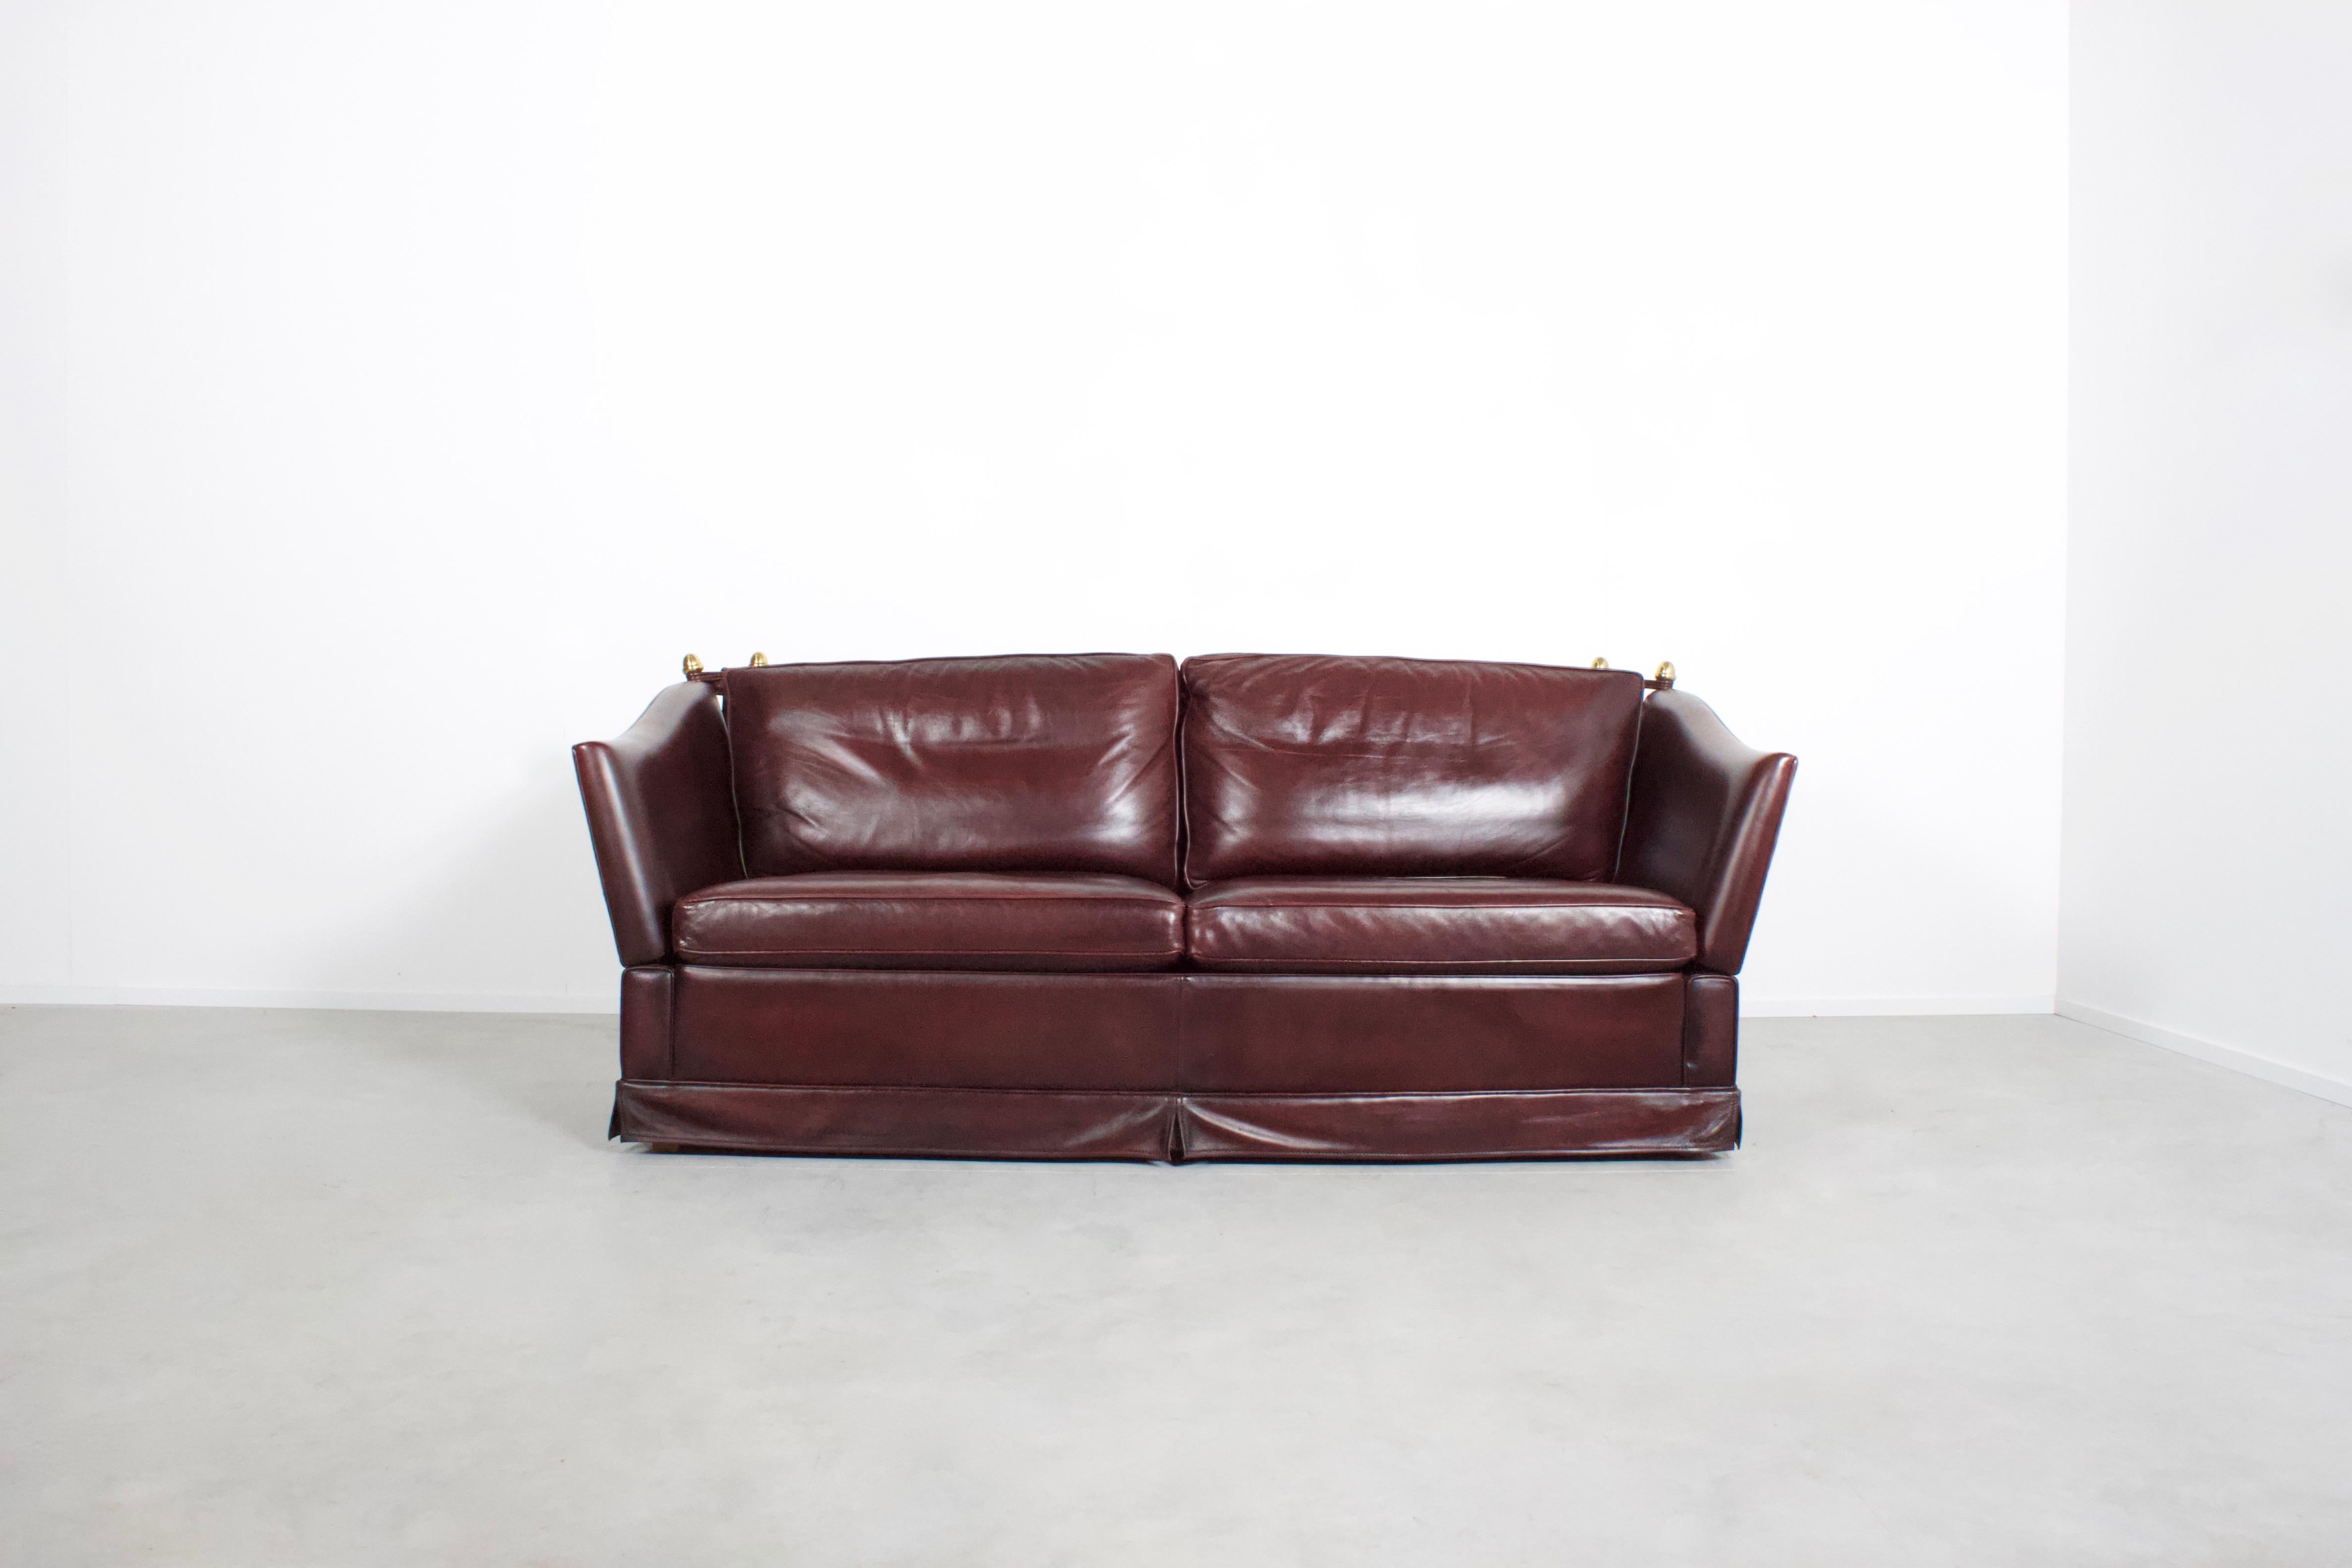 Neoclassical sofa in excellent condition

Manufactured by Maison Jansen, France 1970s

The sofa is upholstered in a beautiful thick burgundy natural leather which is in excellent condition.

The back and the armrests are held together by a